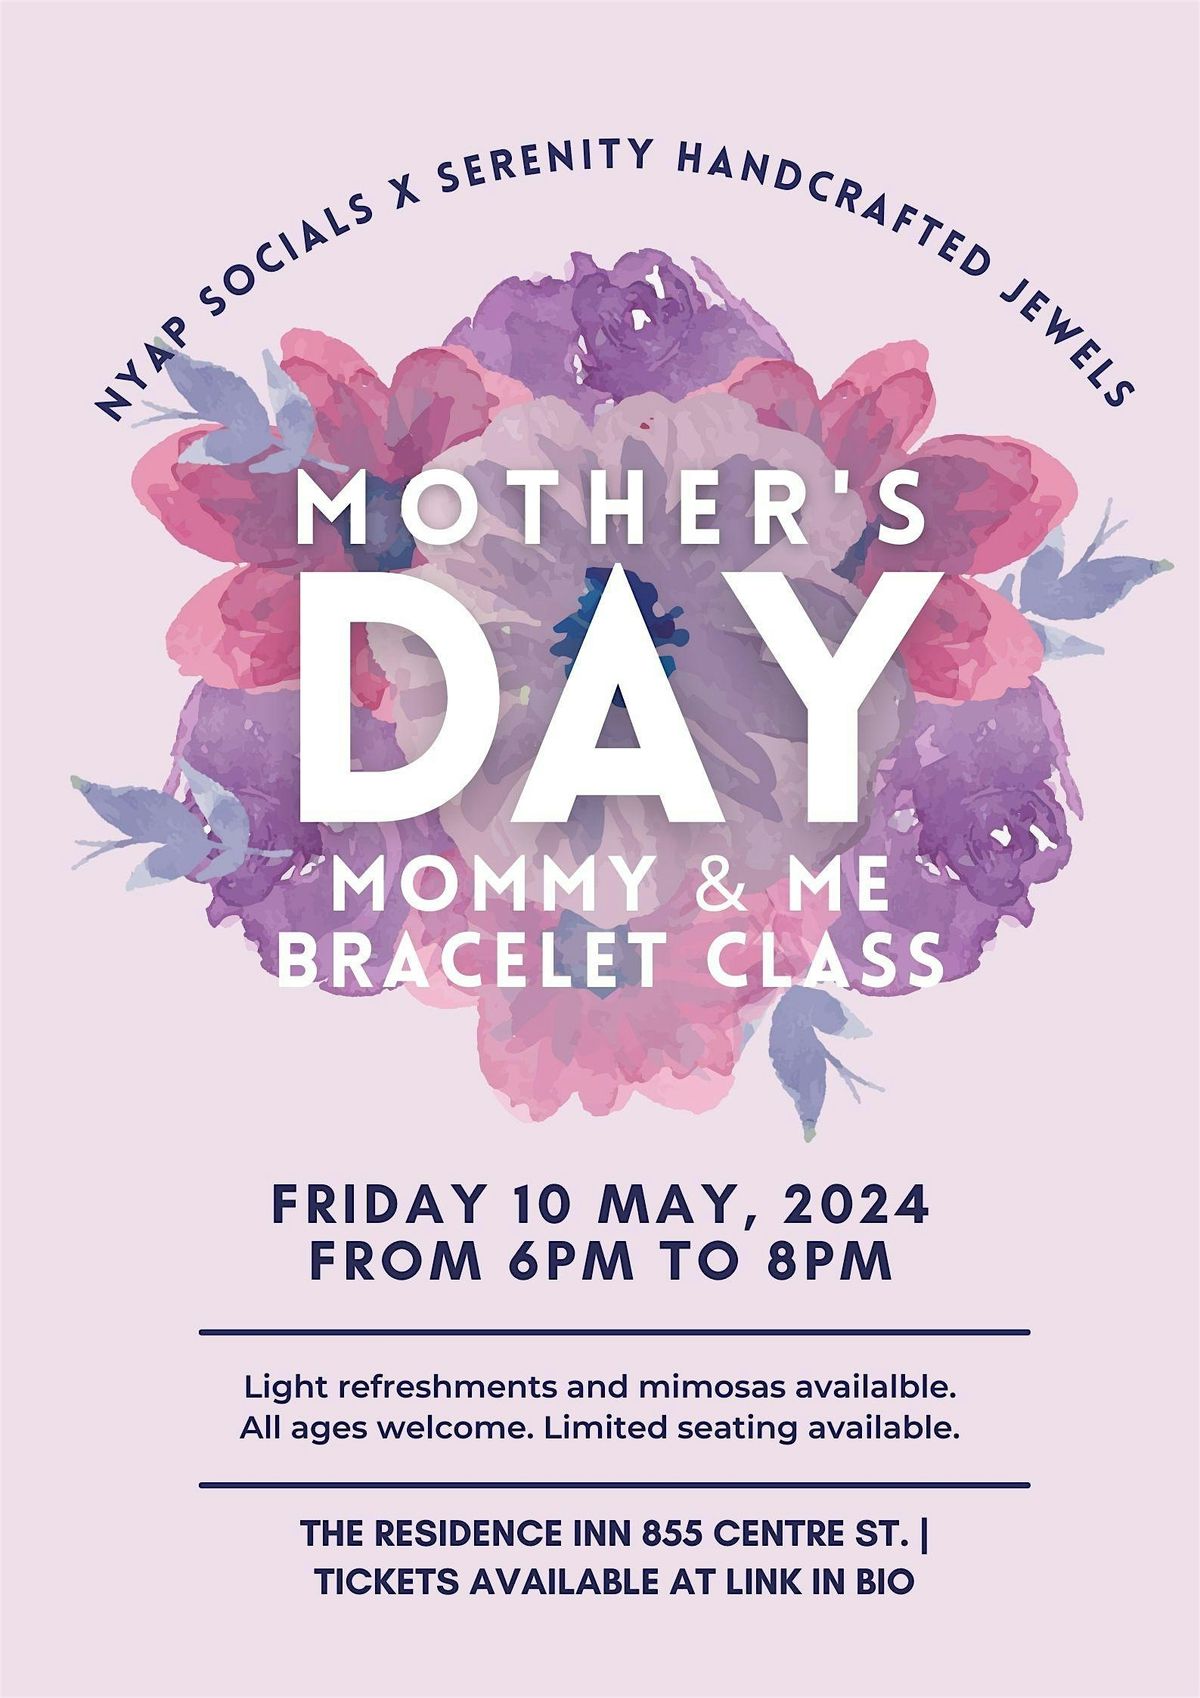 Mommy and Me Bracelet Class